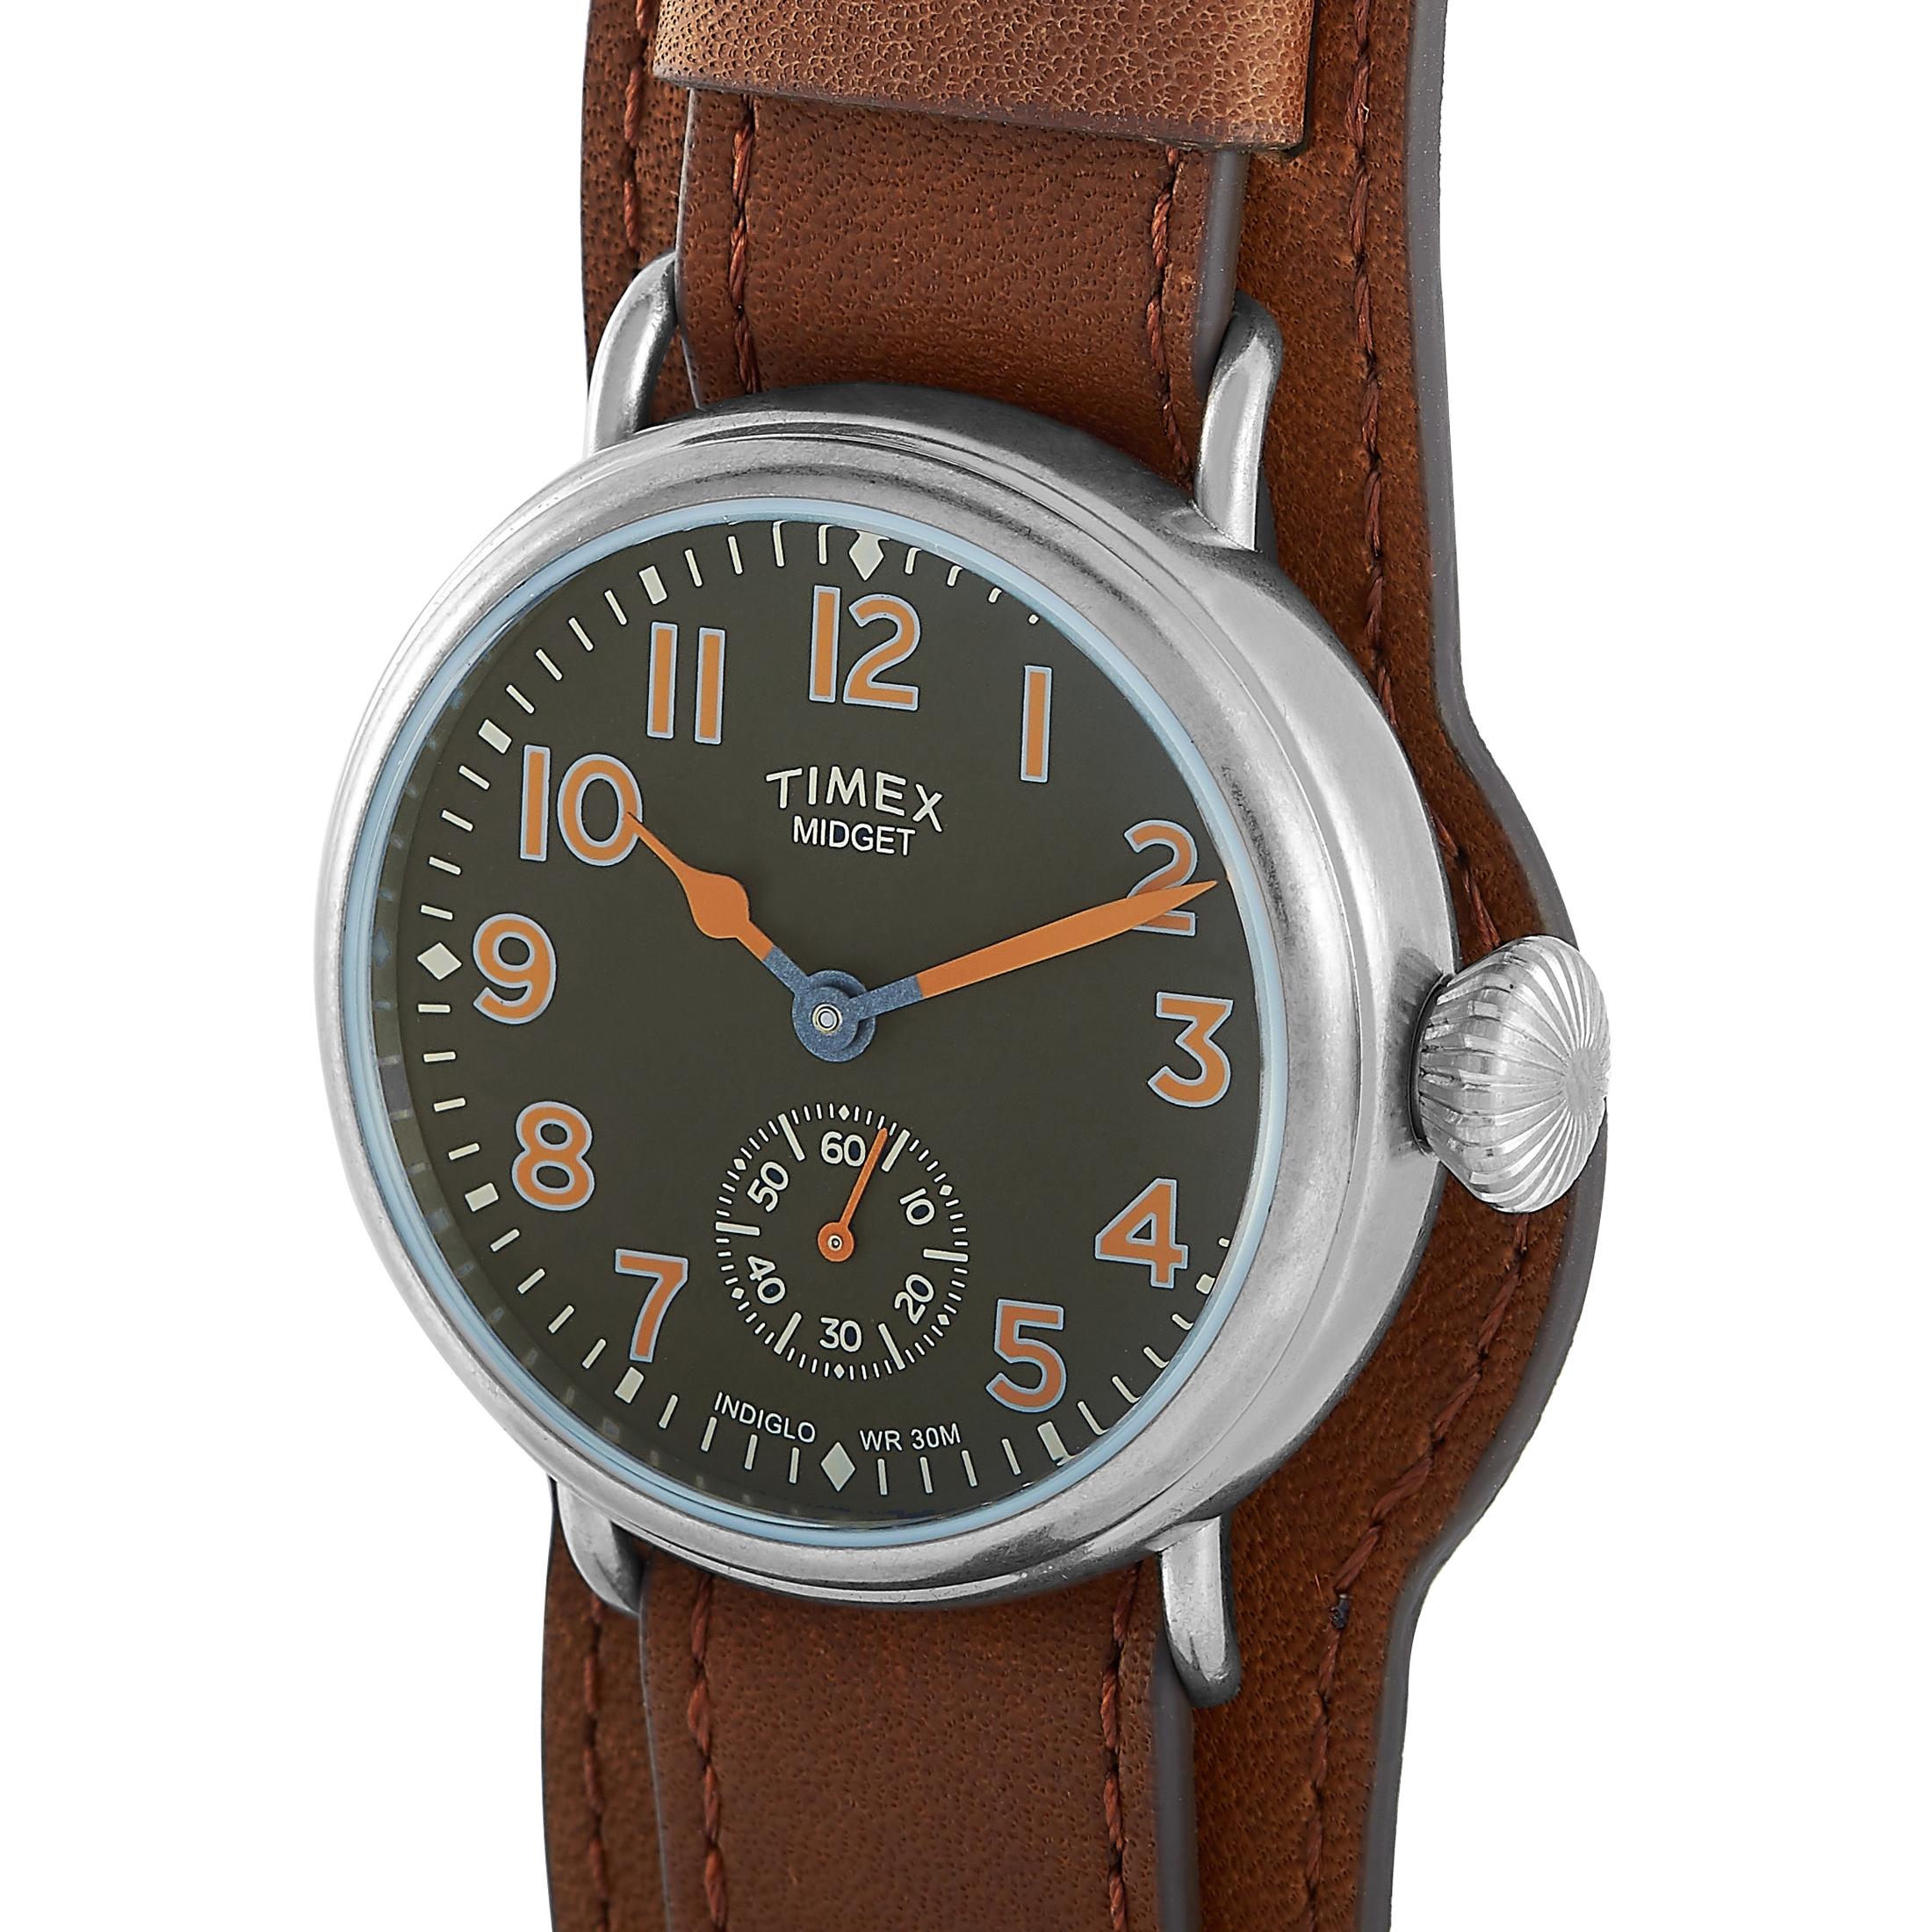 The Timex Midget Japan Edition watch, reference number TW2R45100, is presented in a limited series of 2,500 pieces as an homage to the iconic Ingersoll Midget military watch.

This model boasts a 38 mm stainless steel case that is mounted onto a